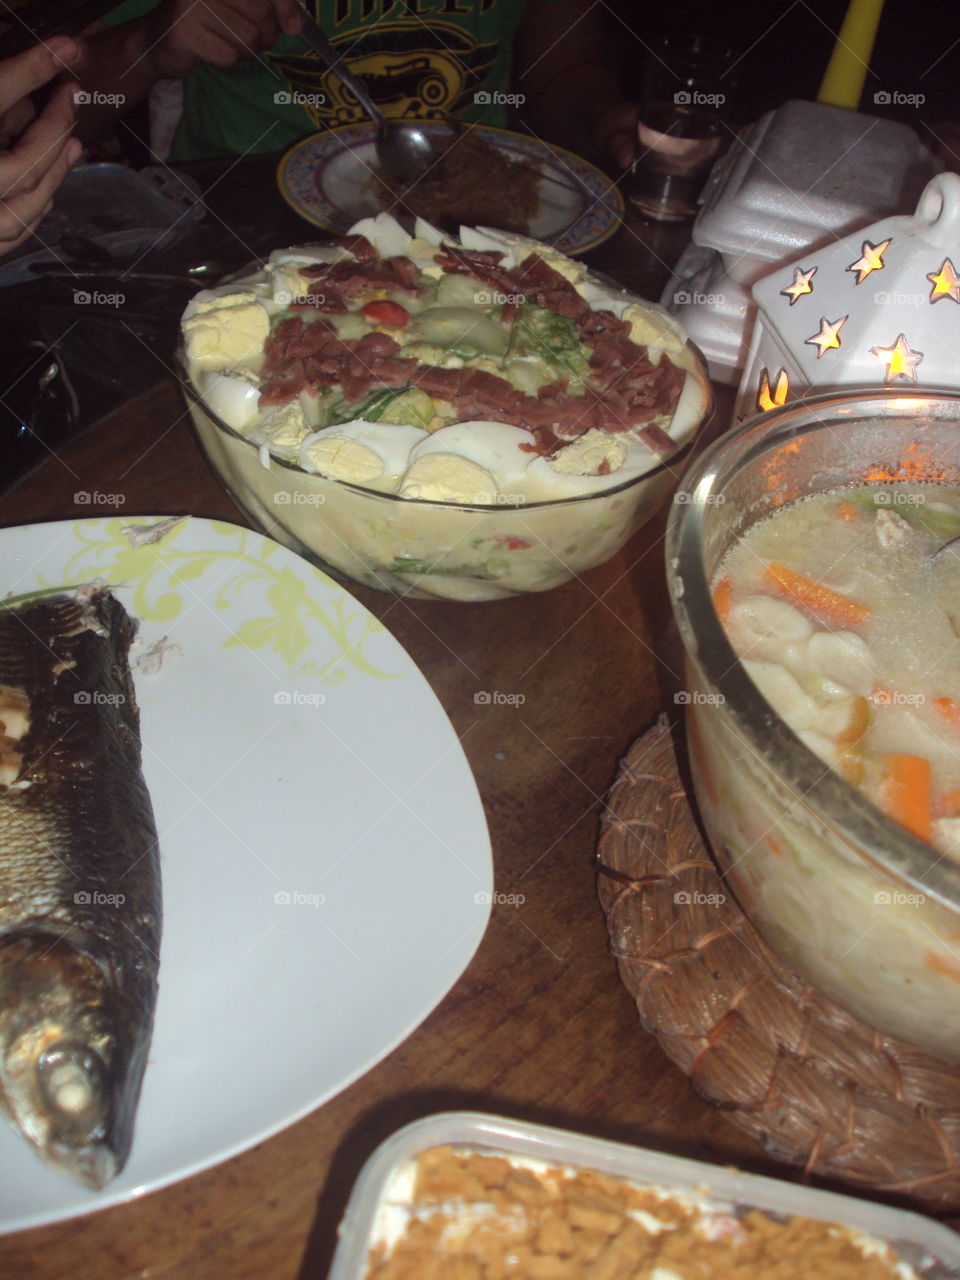 Pinoy foods. Foods from Philippines